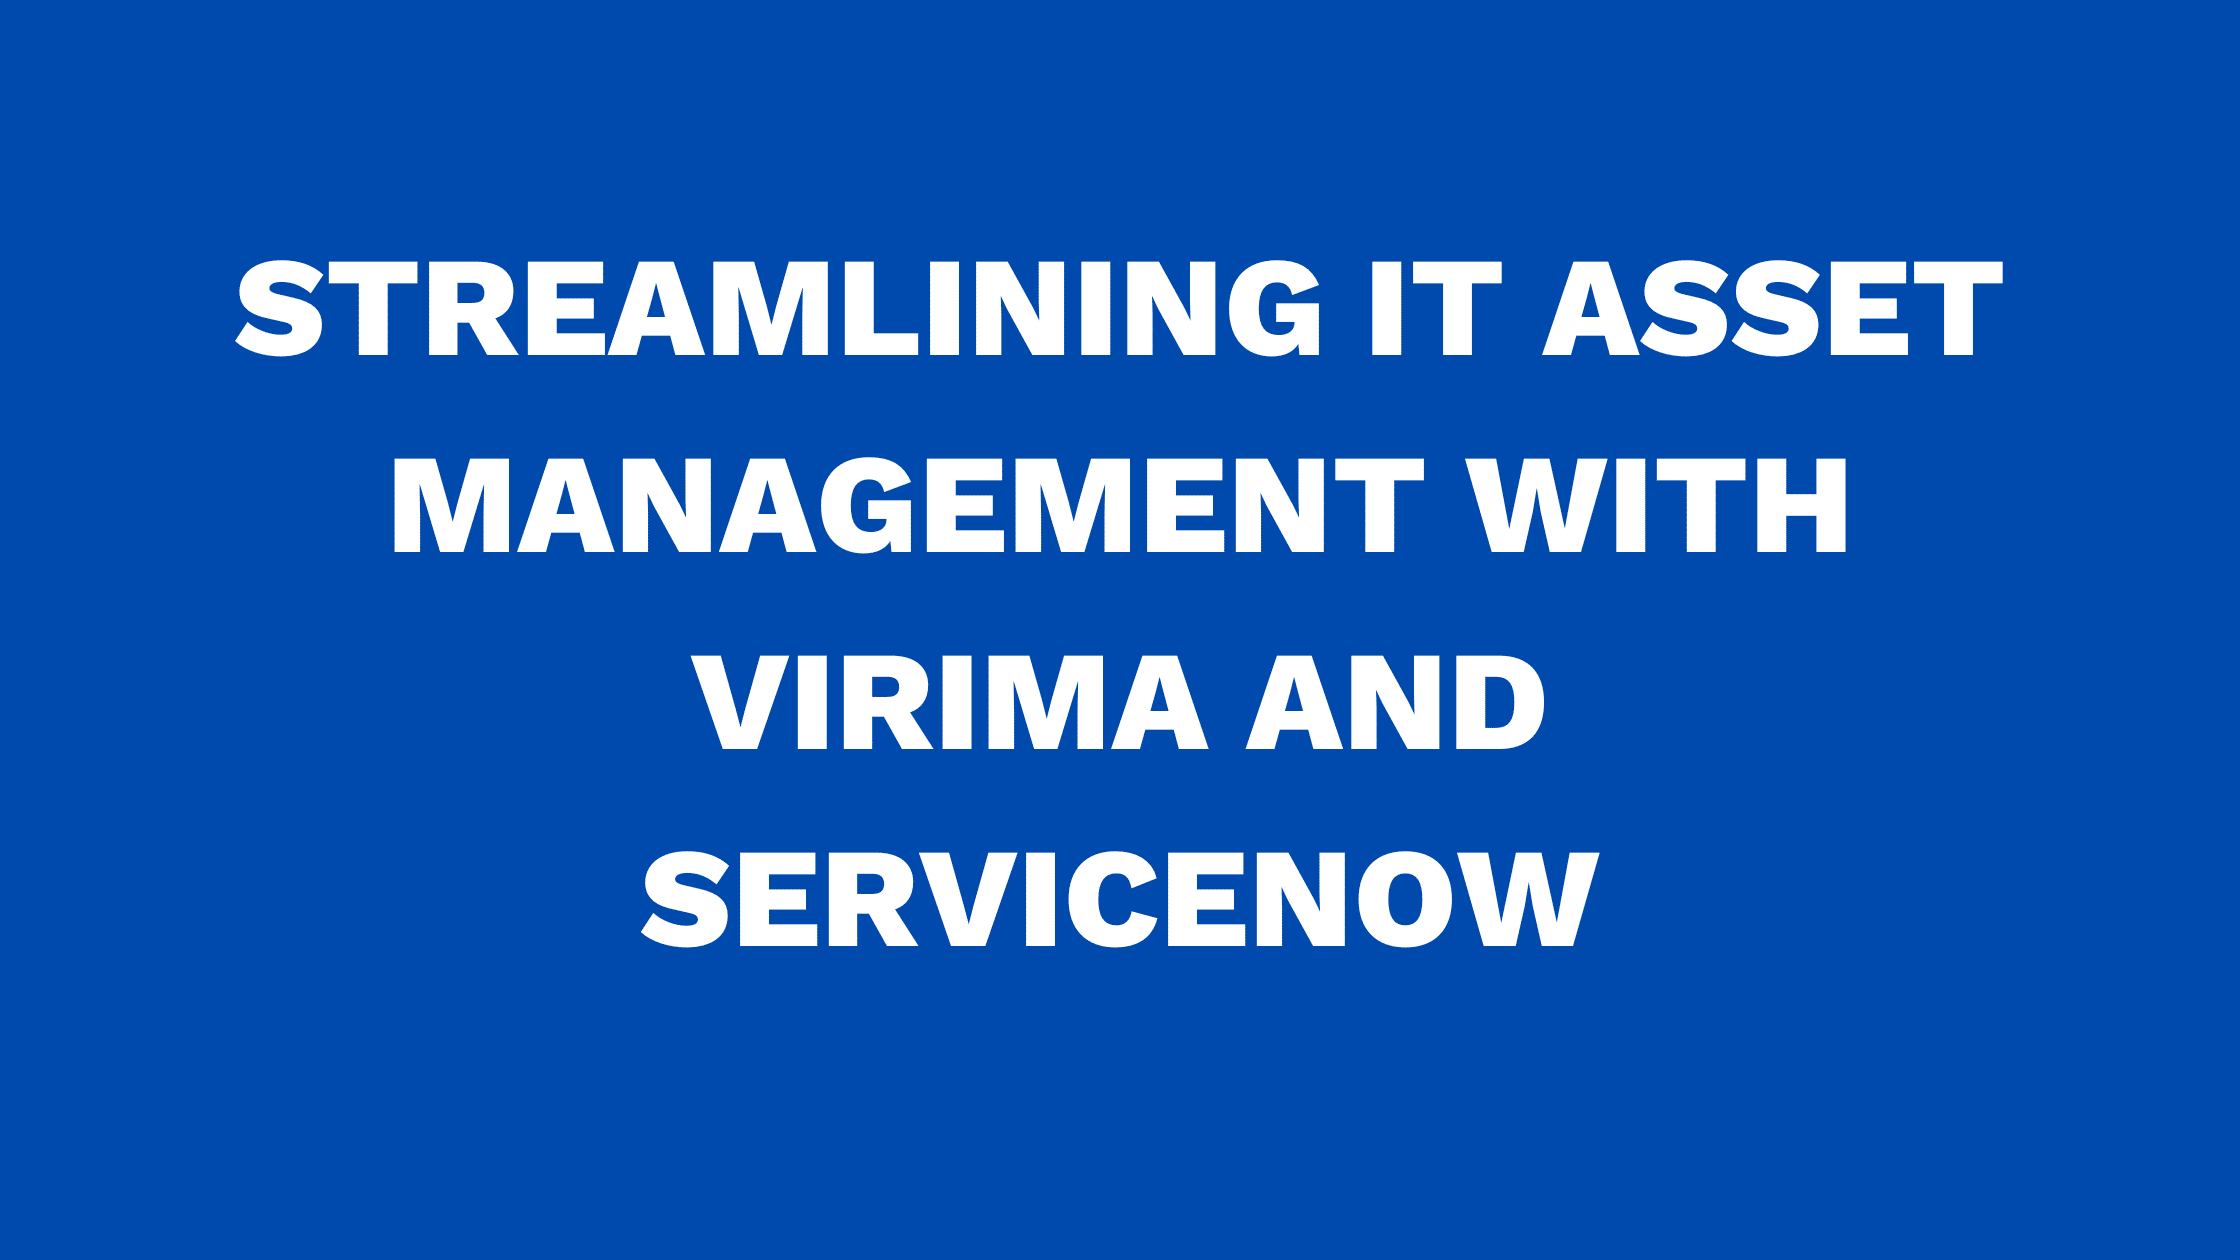 Streamlining IT Asset Management with Virima and ServiceNow